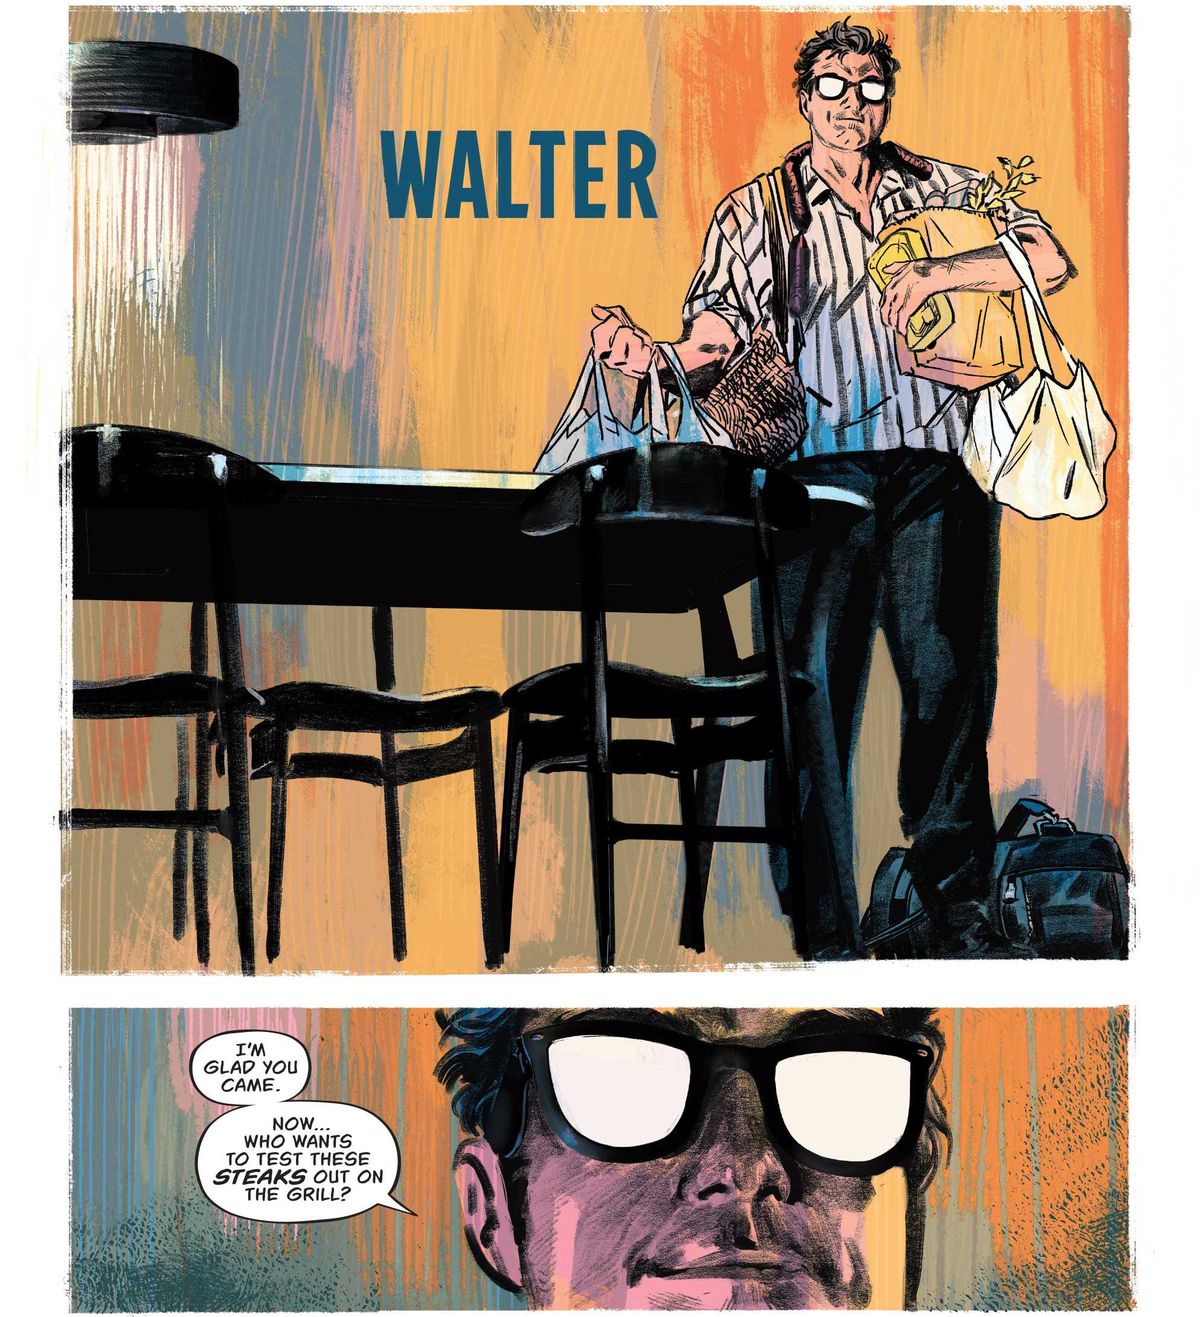 Walter sets groceries down on a table, saying “I’m glad you came. Now... who wants to test these steaks out on the grill?” His glasses reflect the light ominously like an anime villain in The Nice House on the Lake #1, DC Comics (2023).